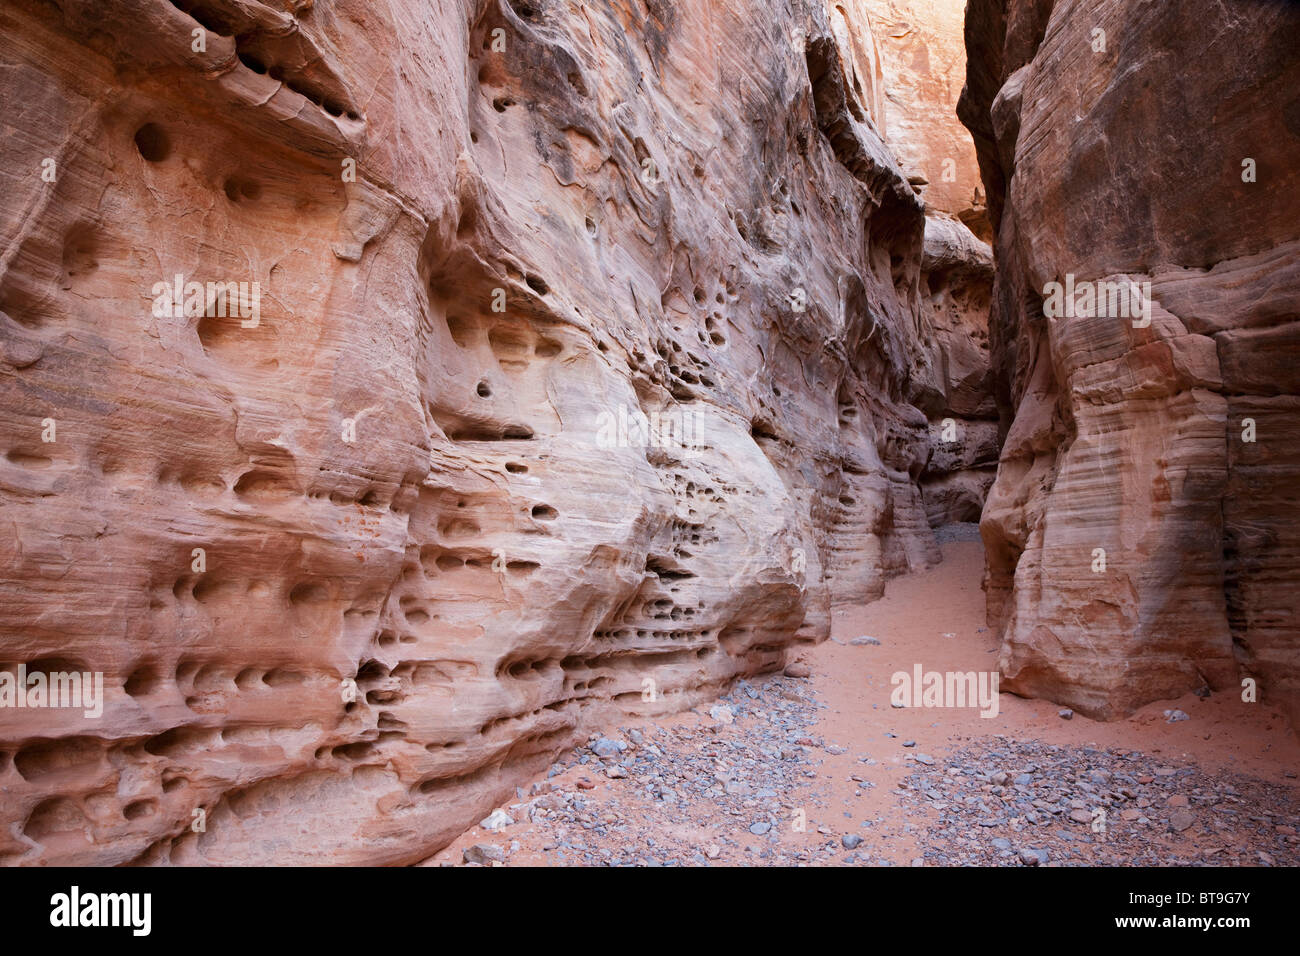 White Dome Slot Canyon, Valley of Fire State Park, Nevada, USA Stockfoto